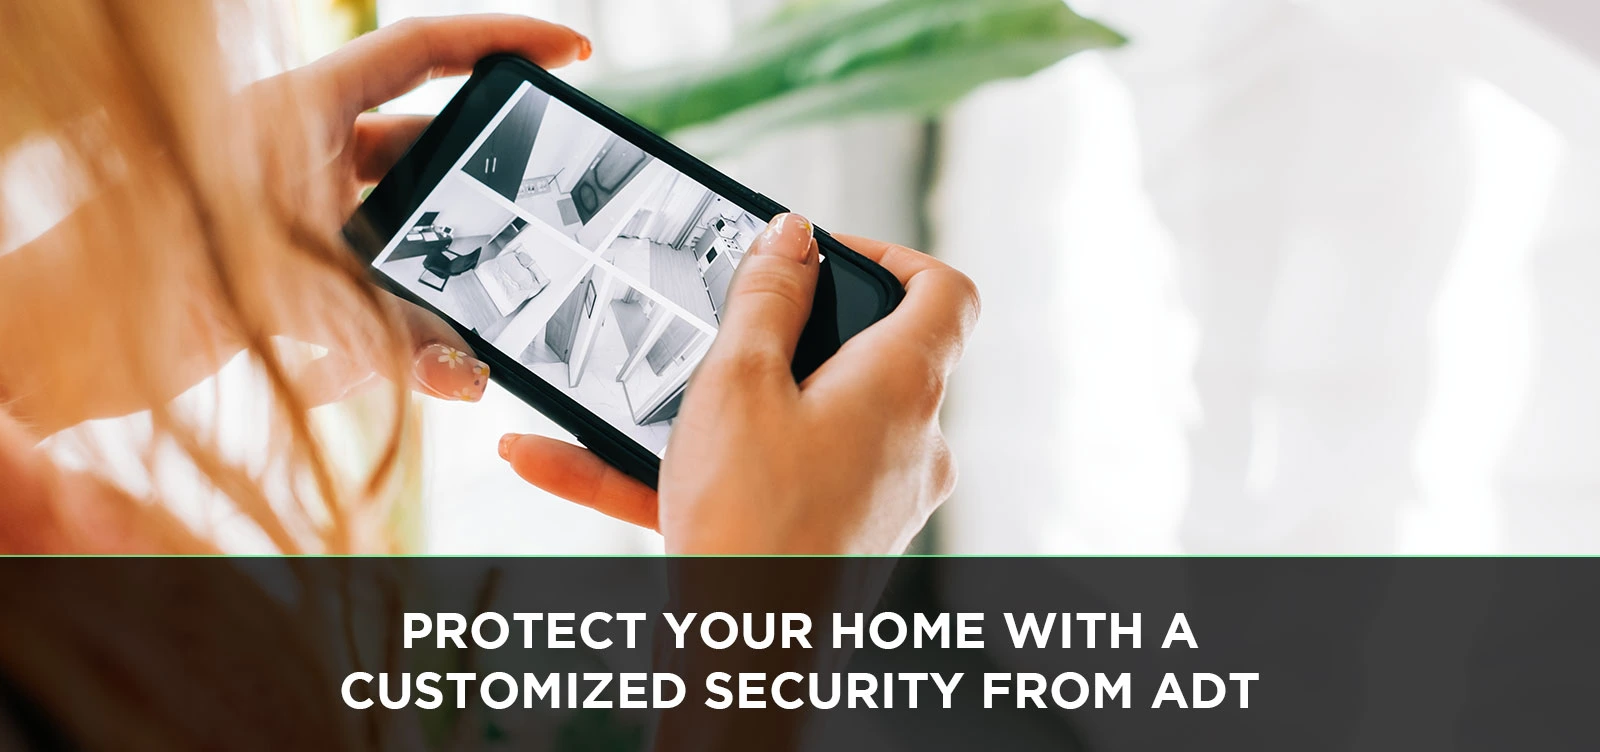 Protect Your Home with a Customized Security from ADT